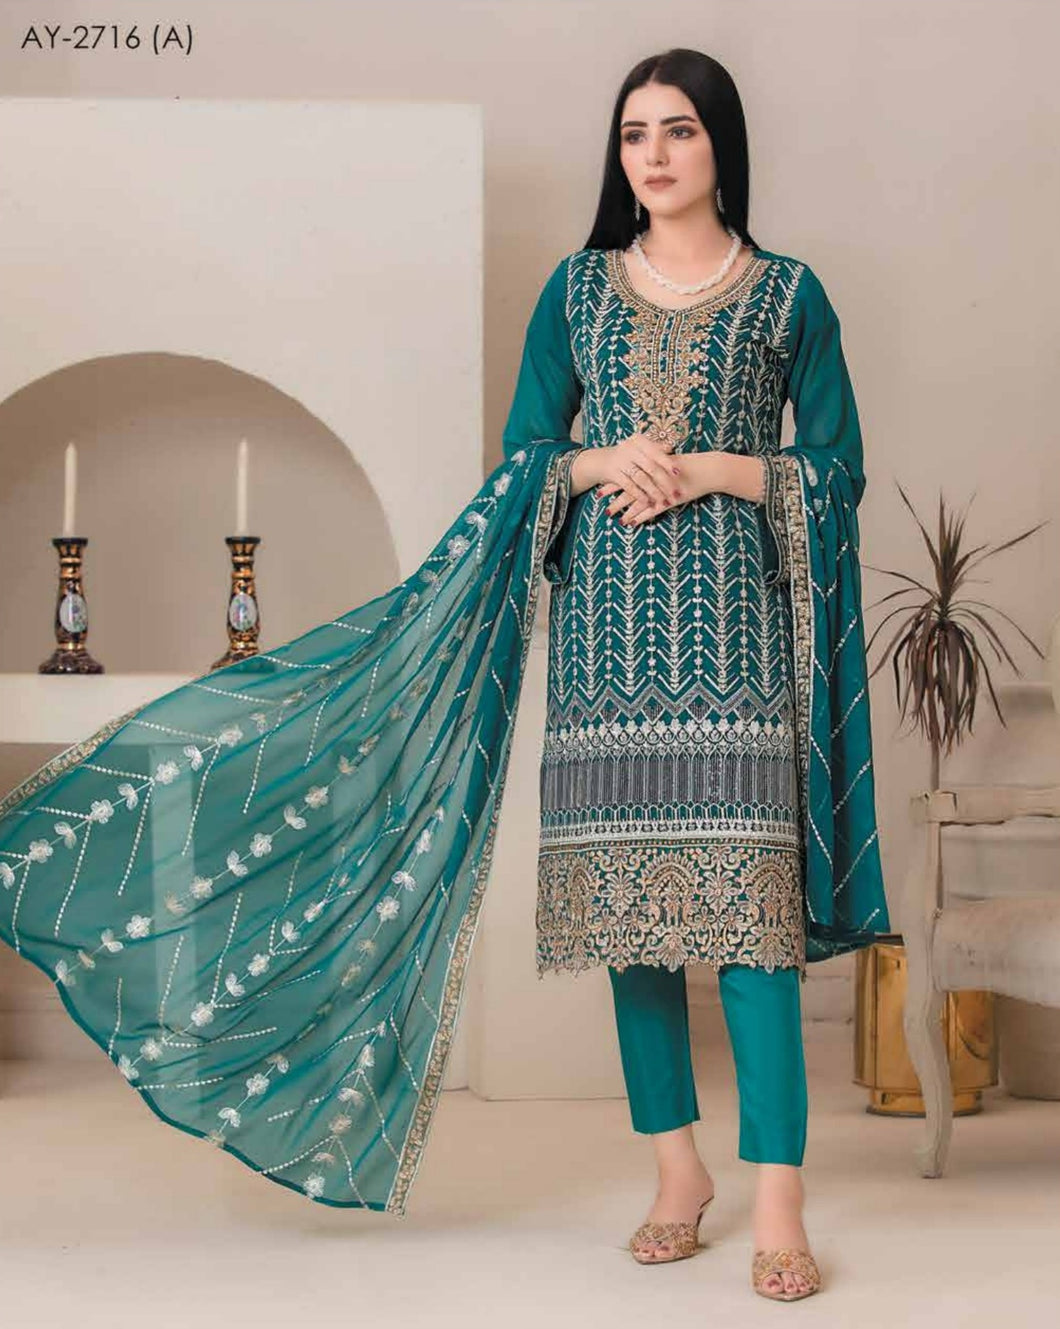 Bin Hameed 3pc Unstitched Heavy Embroidered Fancy Chiffon Dress AY-2716(A)